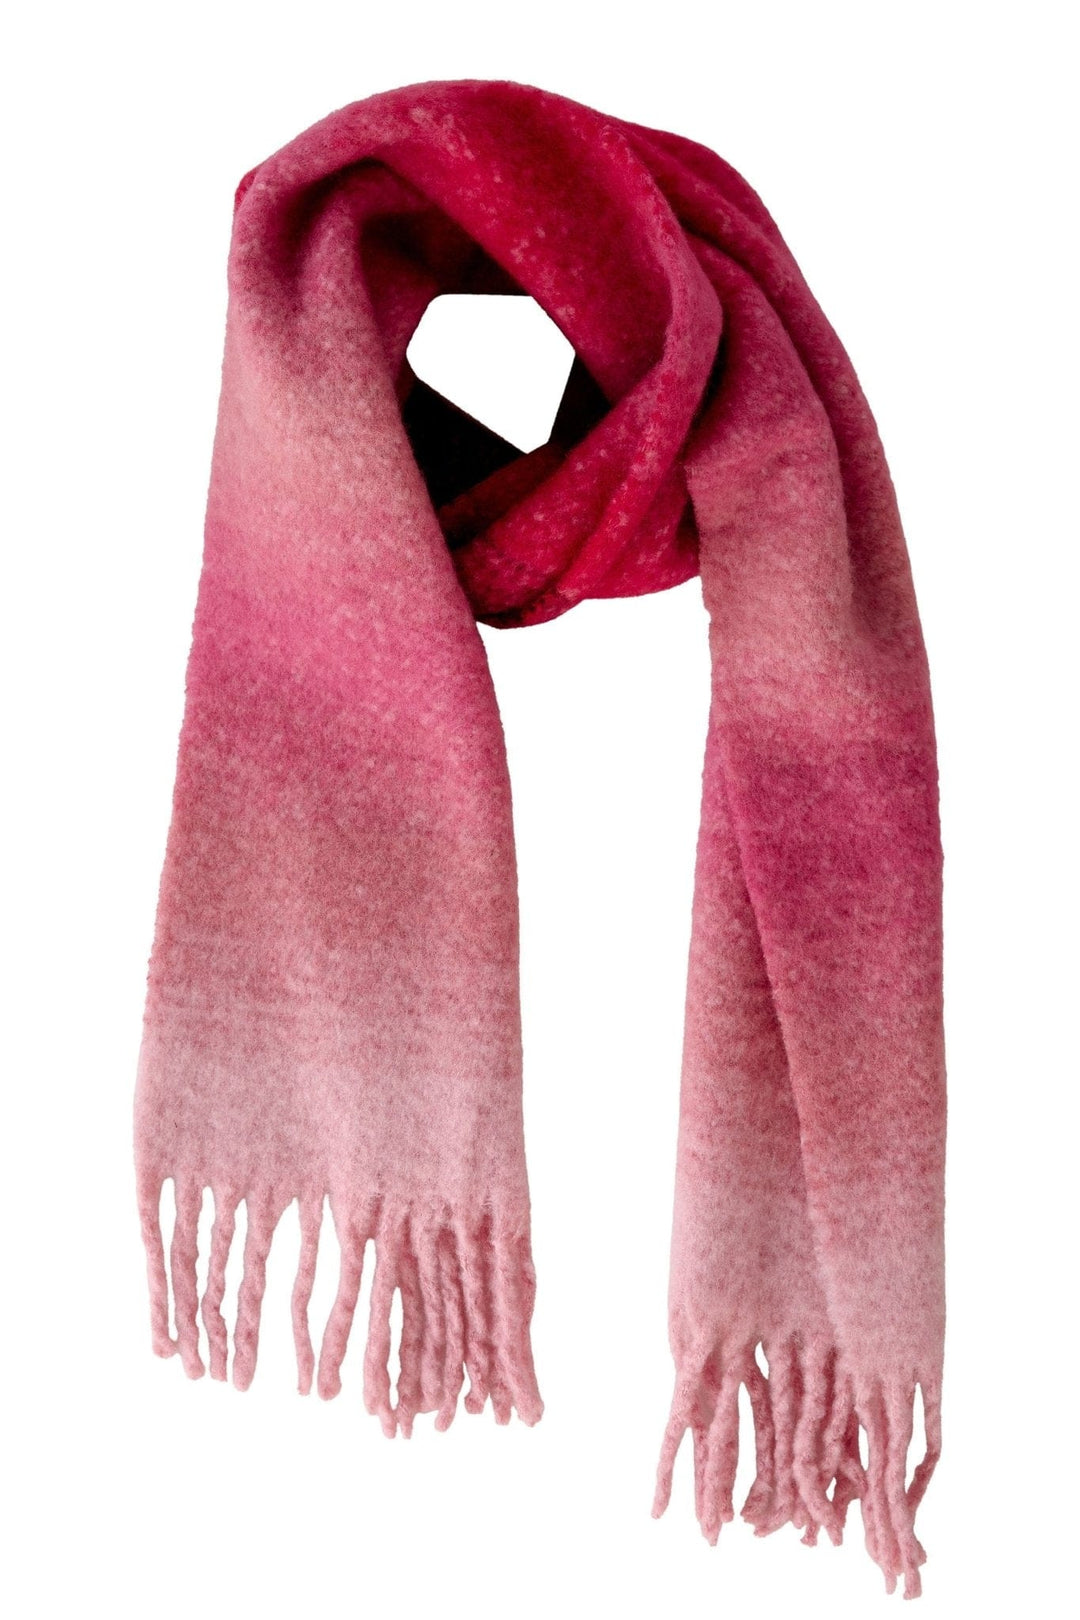 Oui Blanket Scarf With Tassels In Blush & Burgundy - Crabtree Cottage